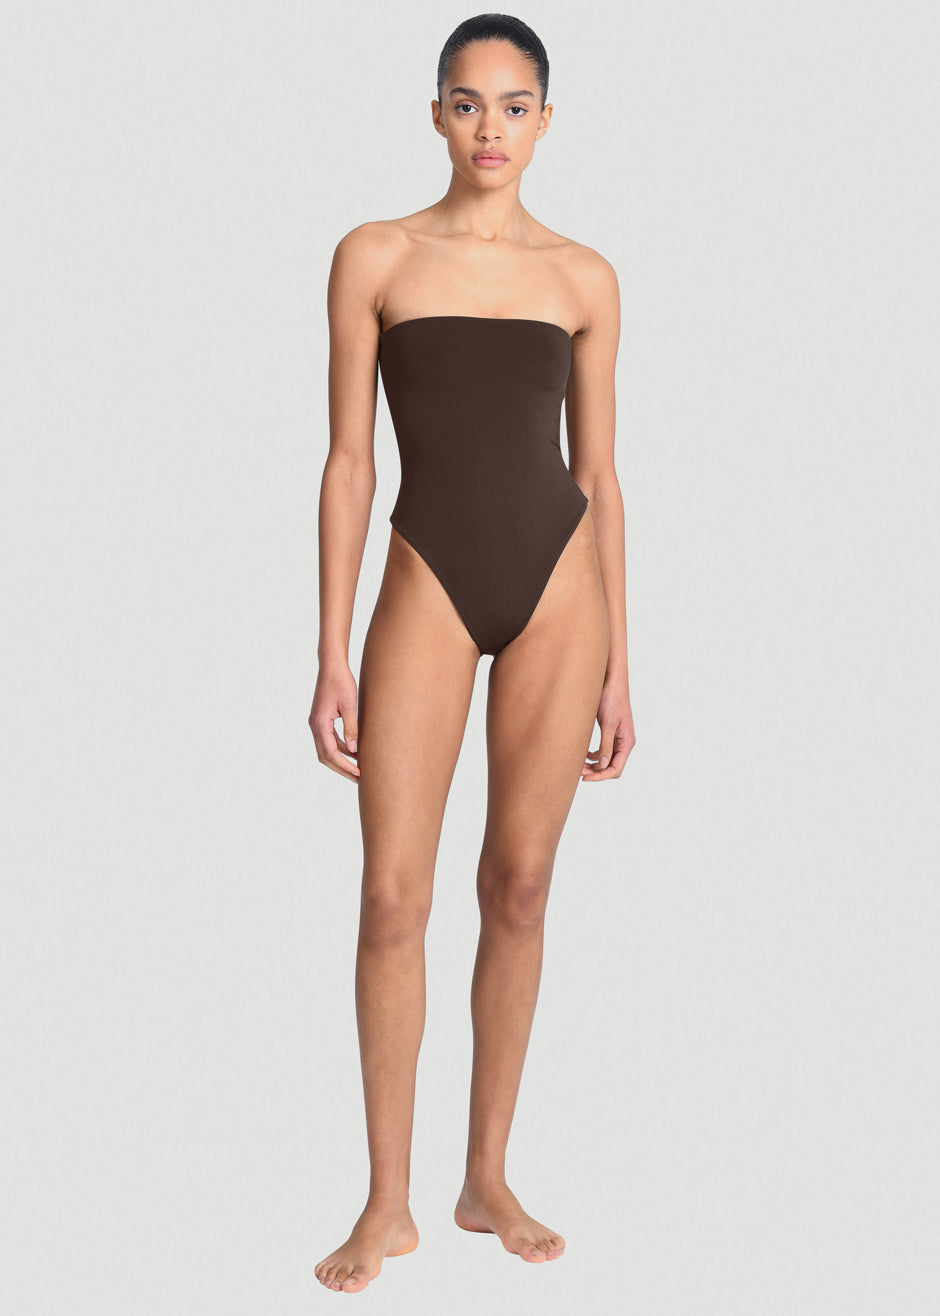 Aexae Bandeau One Piece Swimsuit - Brown